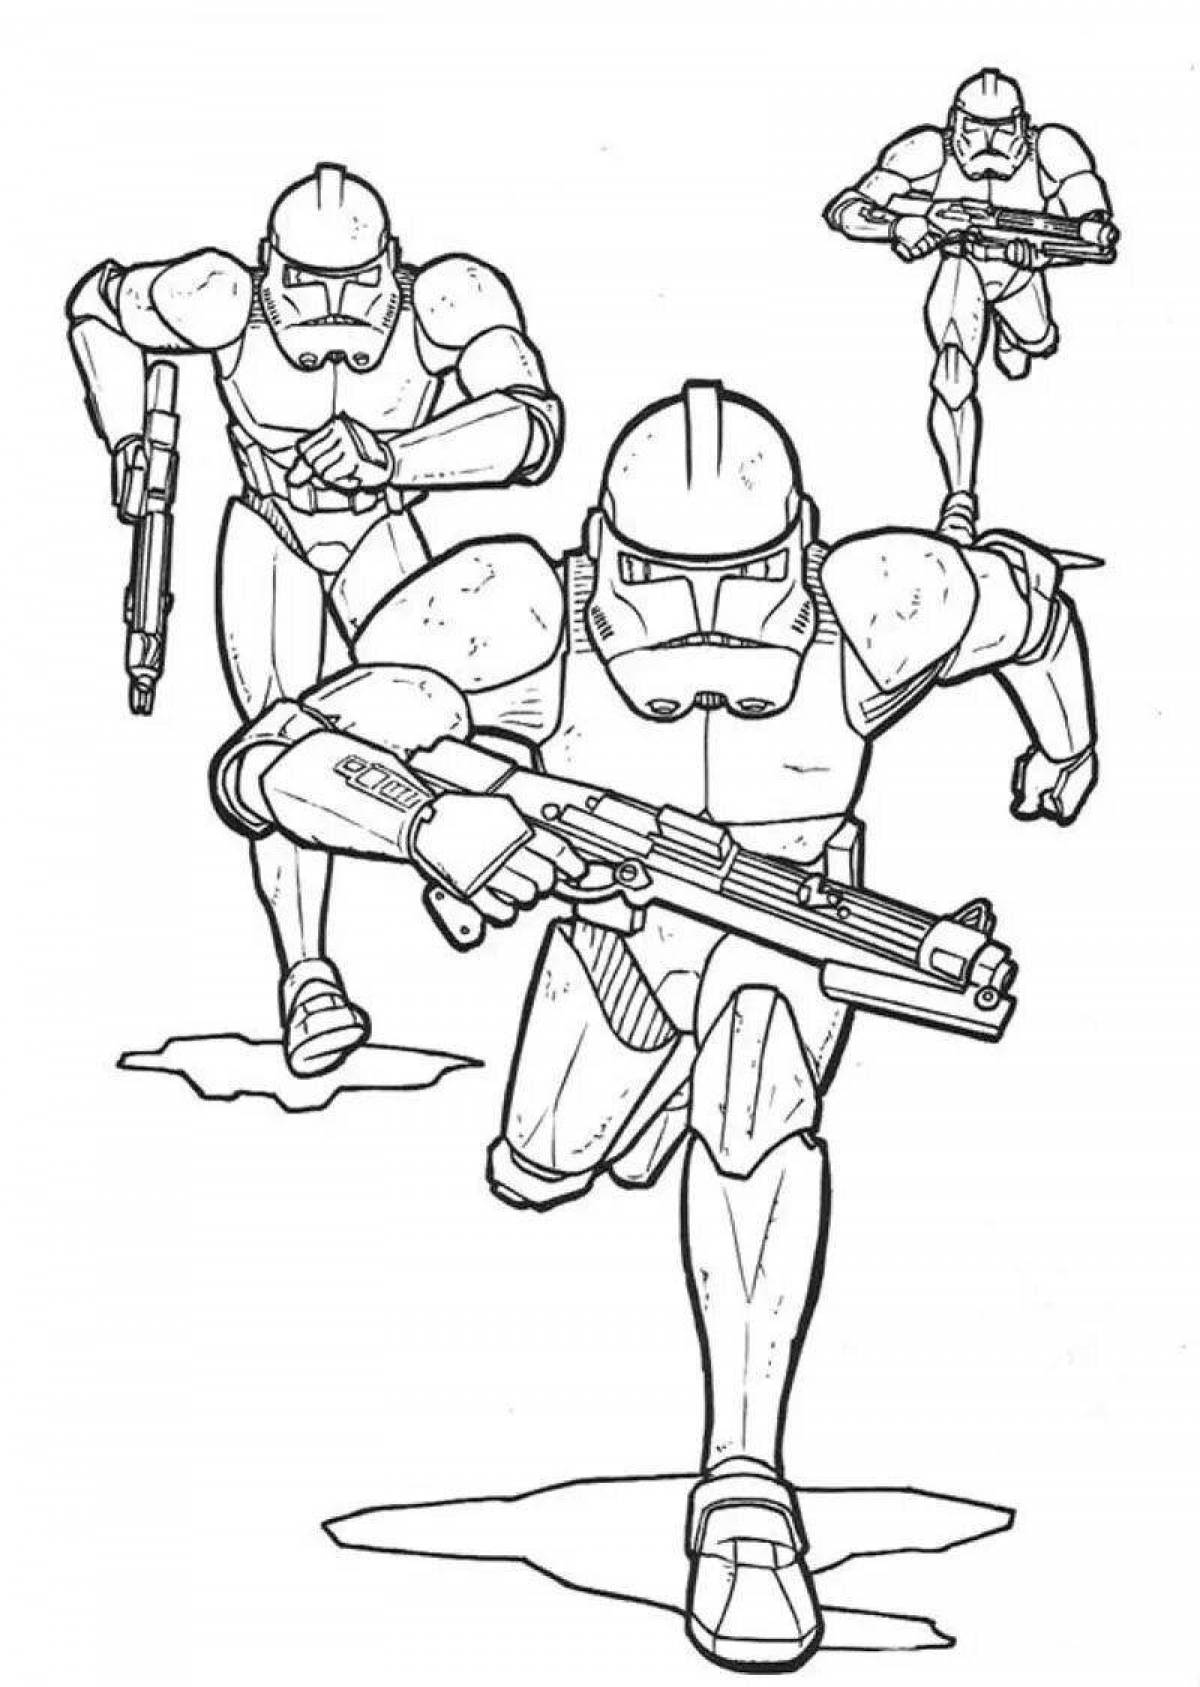 Great star wars coloring book for boys